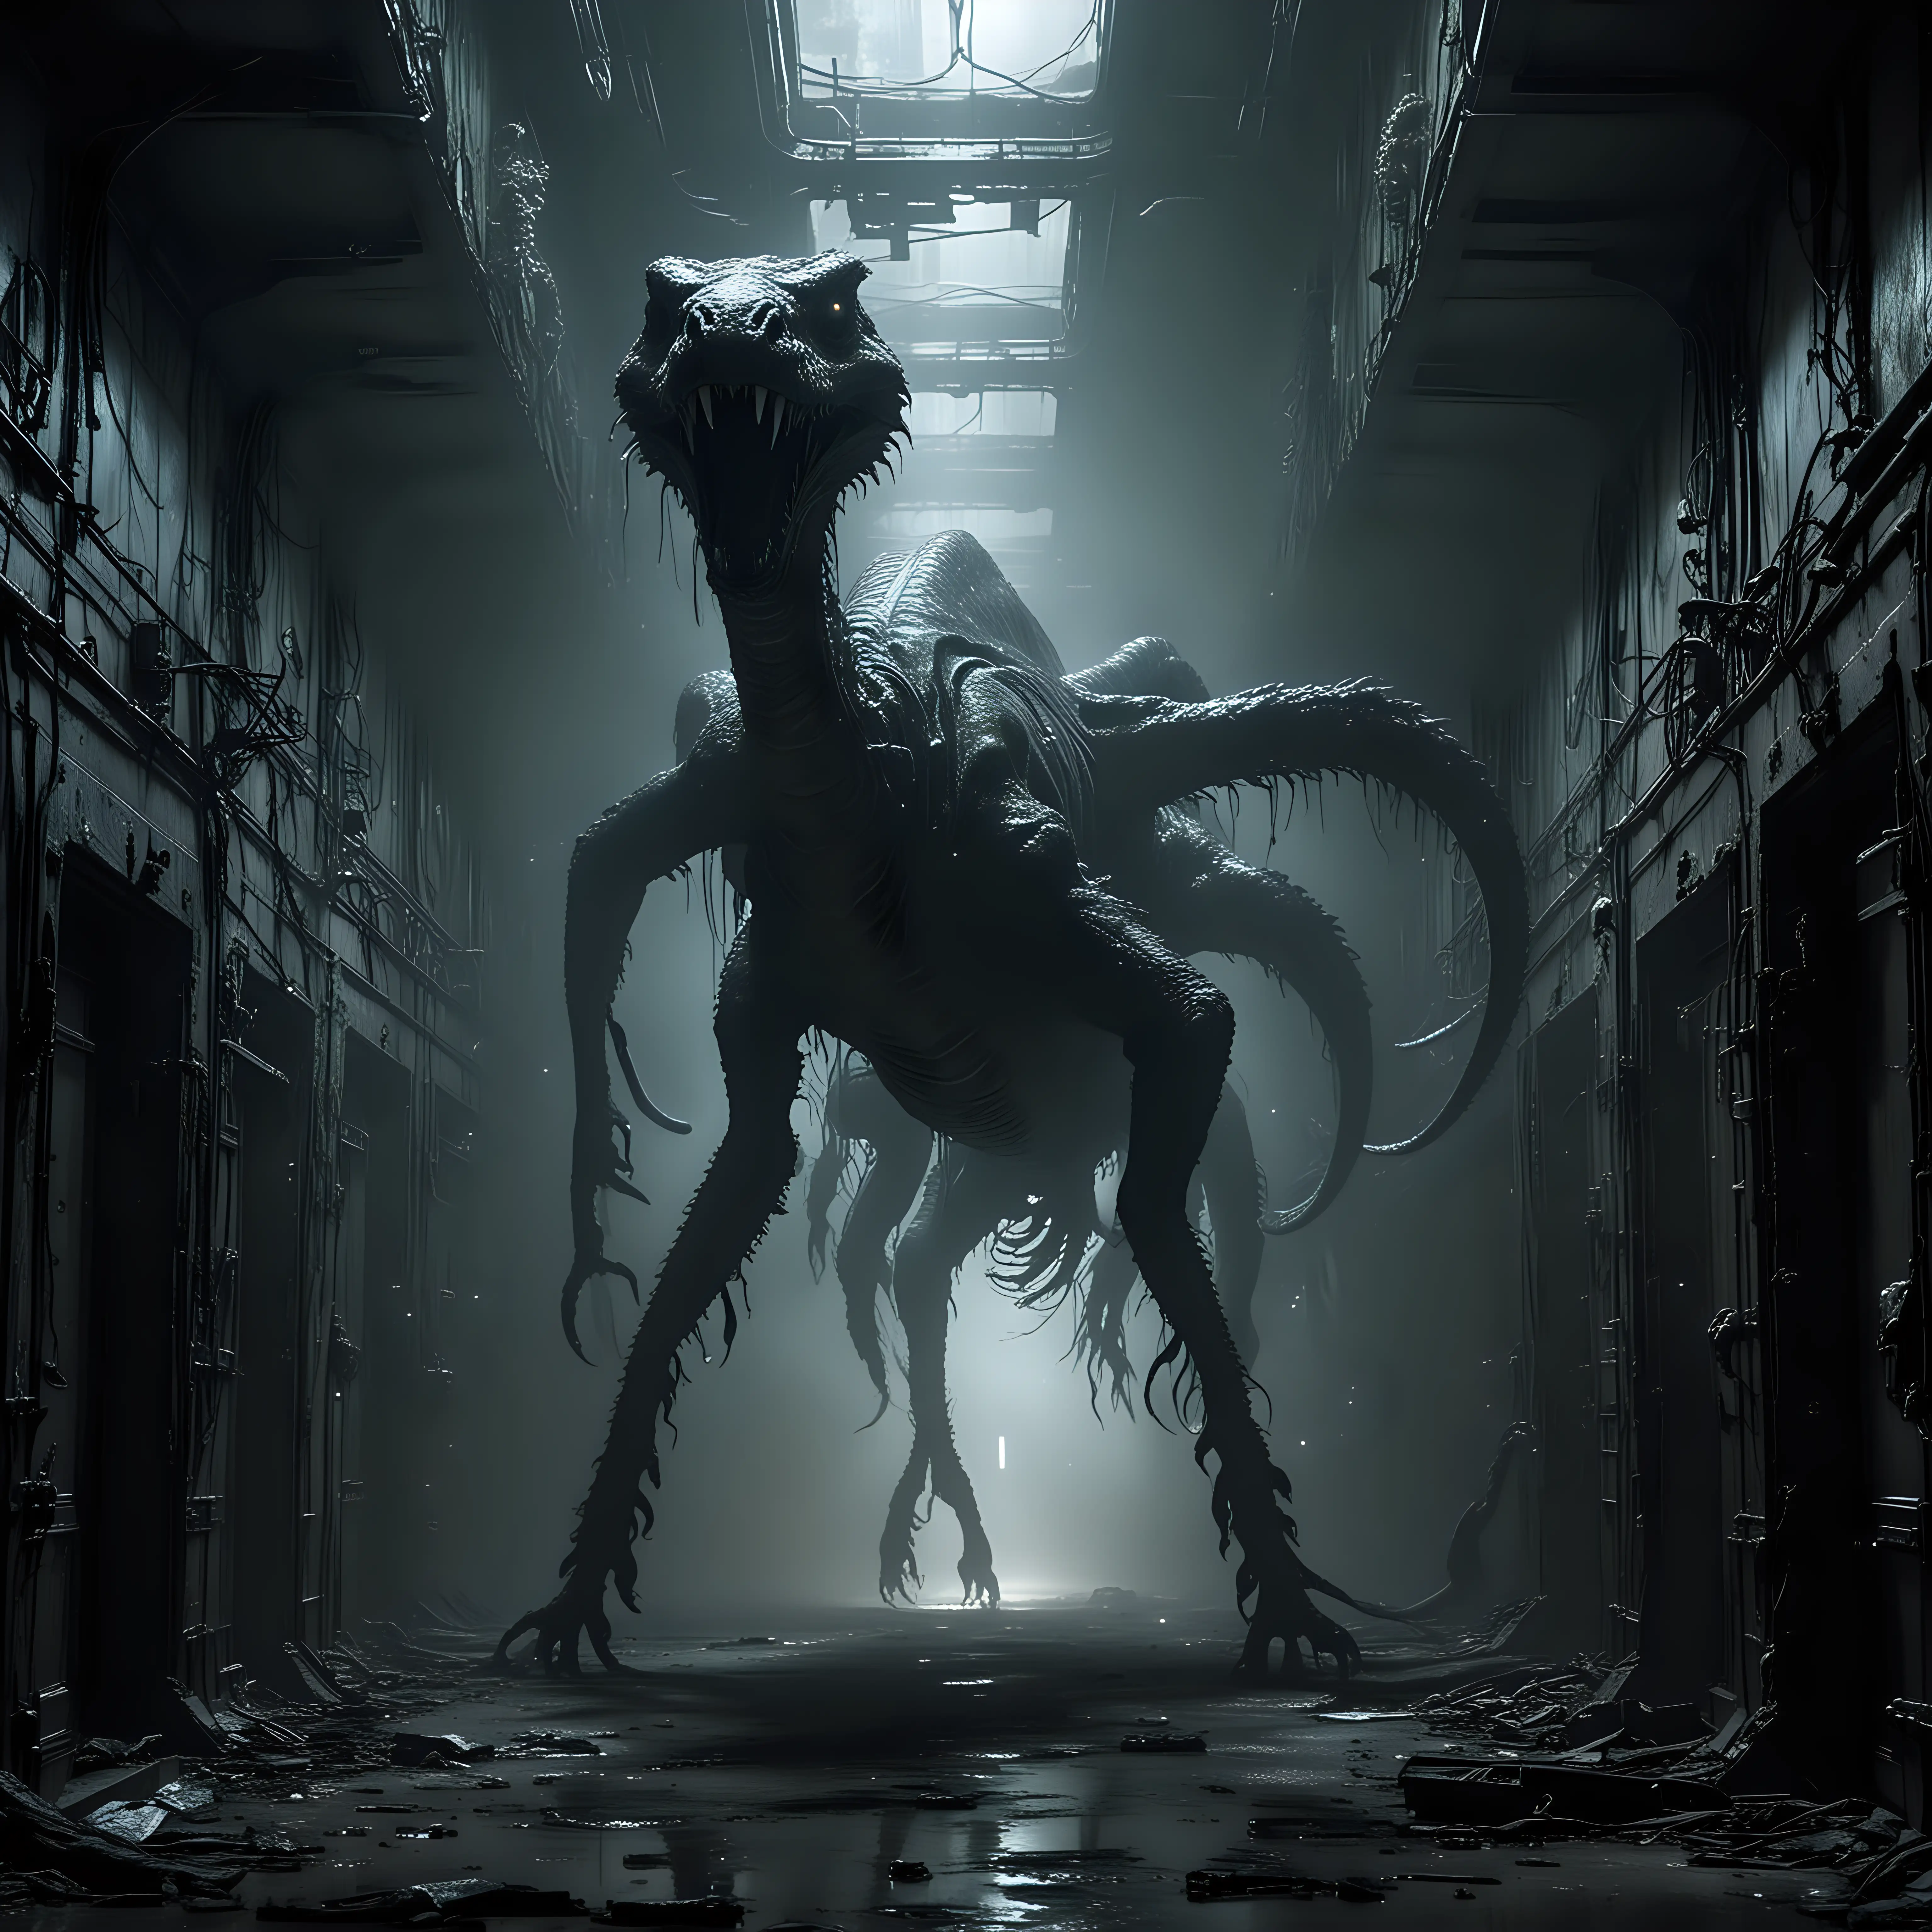 Ethereal Chimera Monstrous Mystical Creature in Abandoned Spacecraft